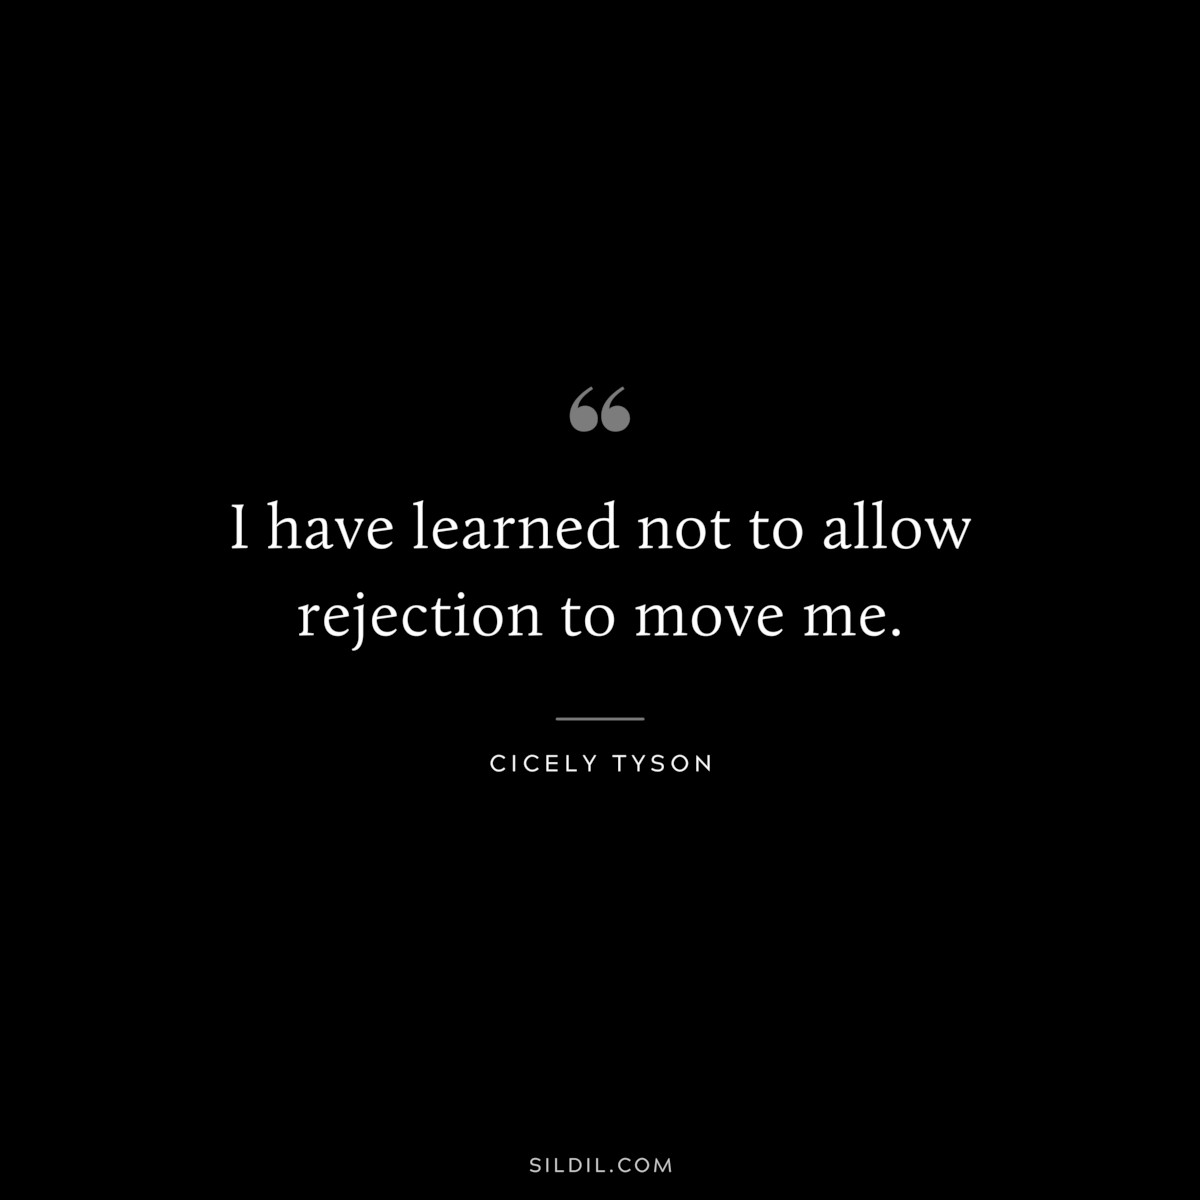 I have learned not to allow rejection to move me. ― Cicely Tyson